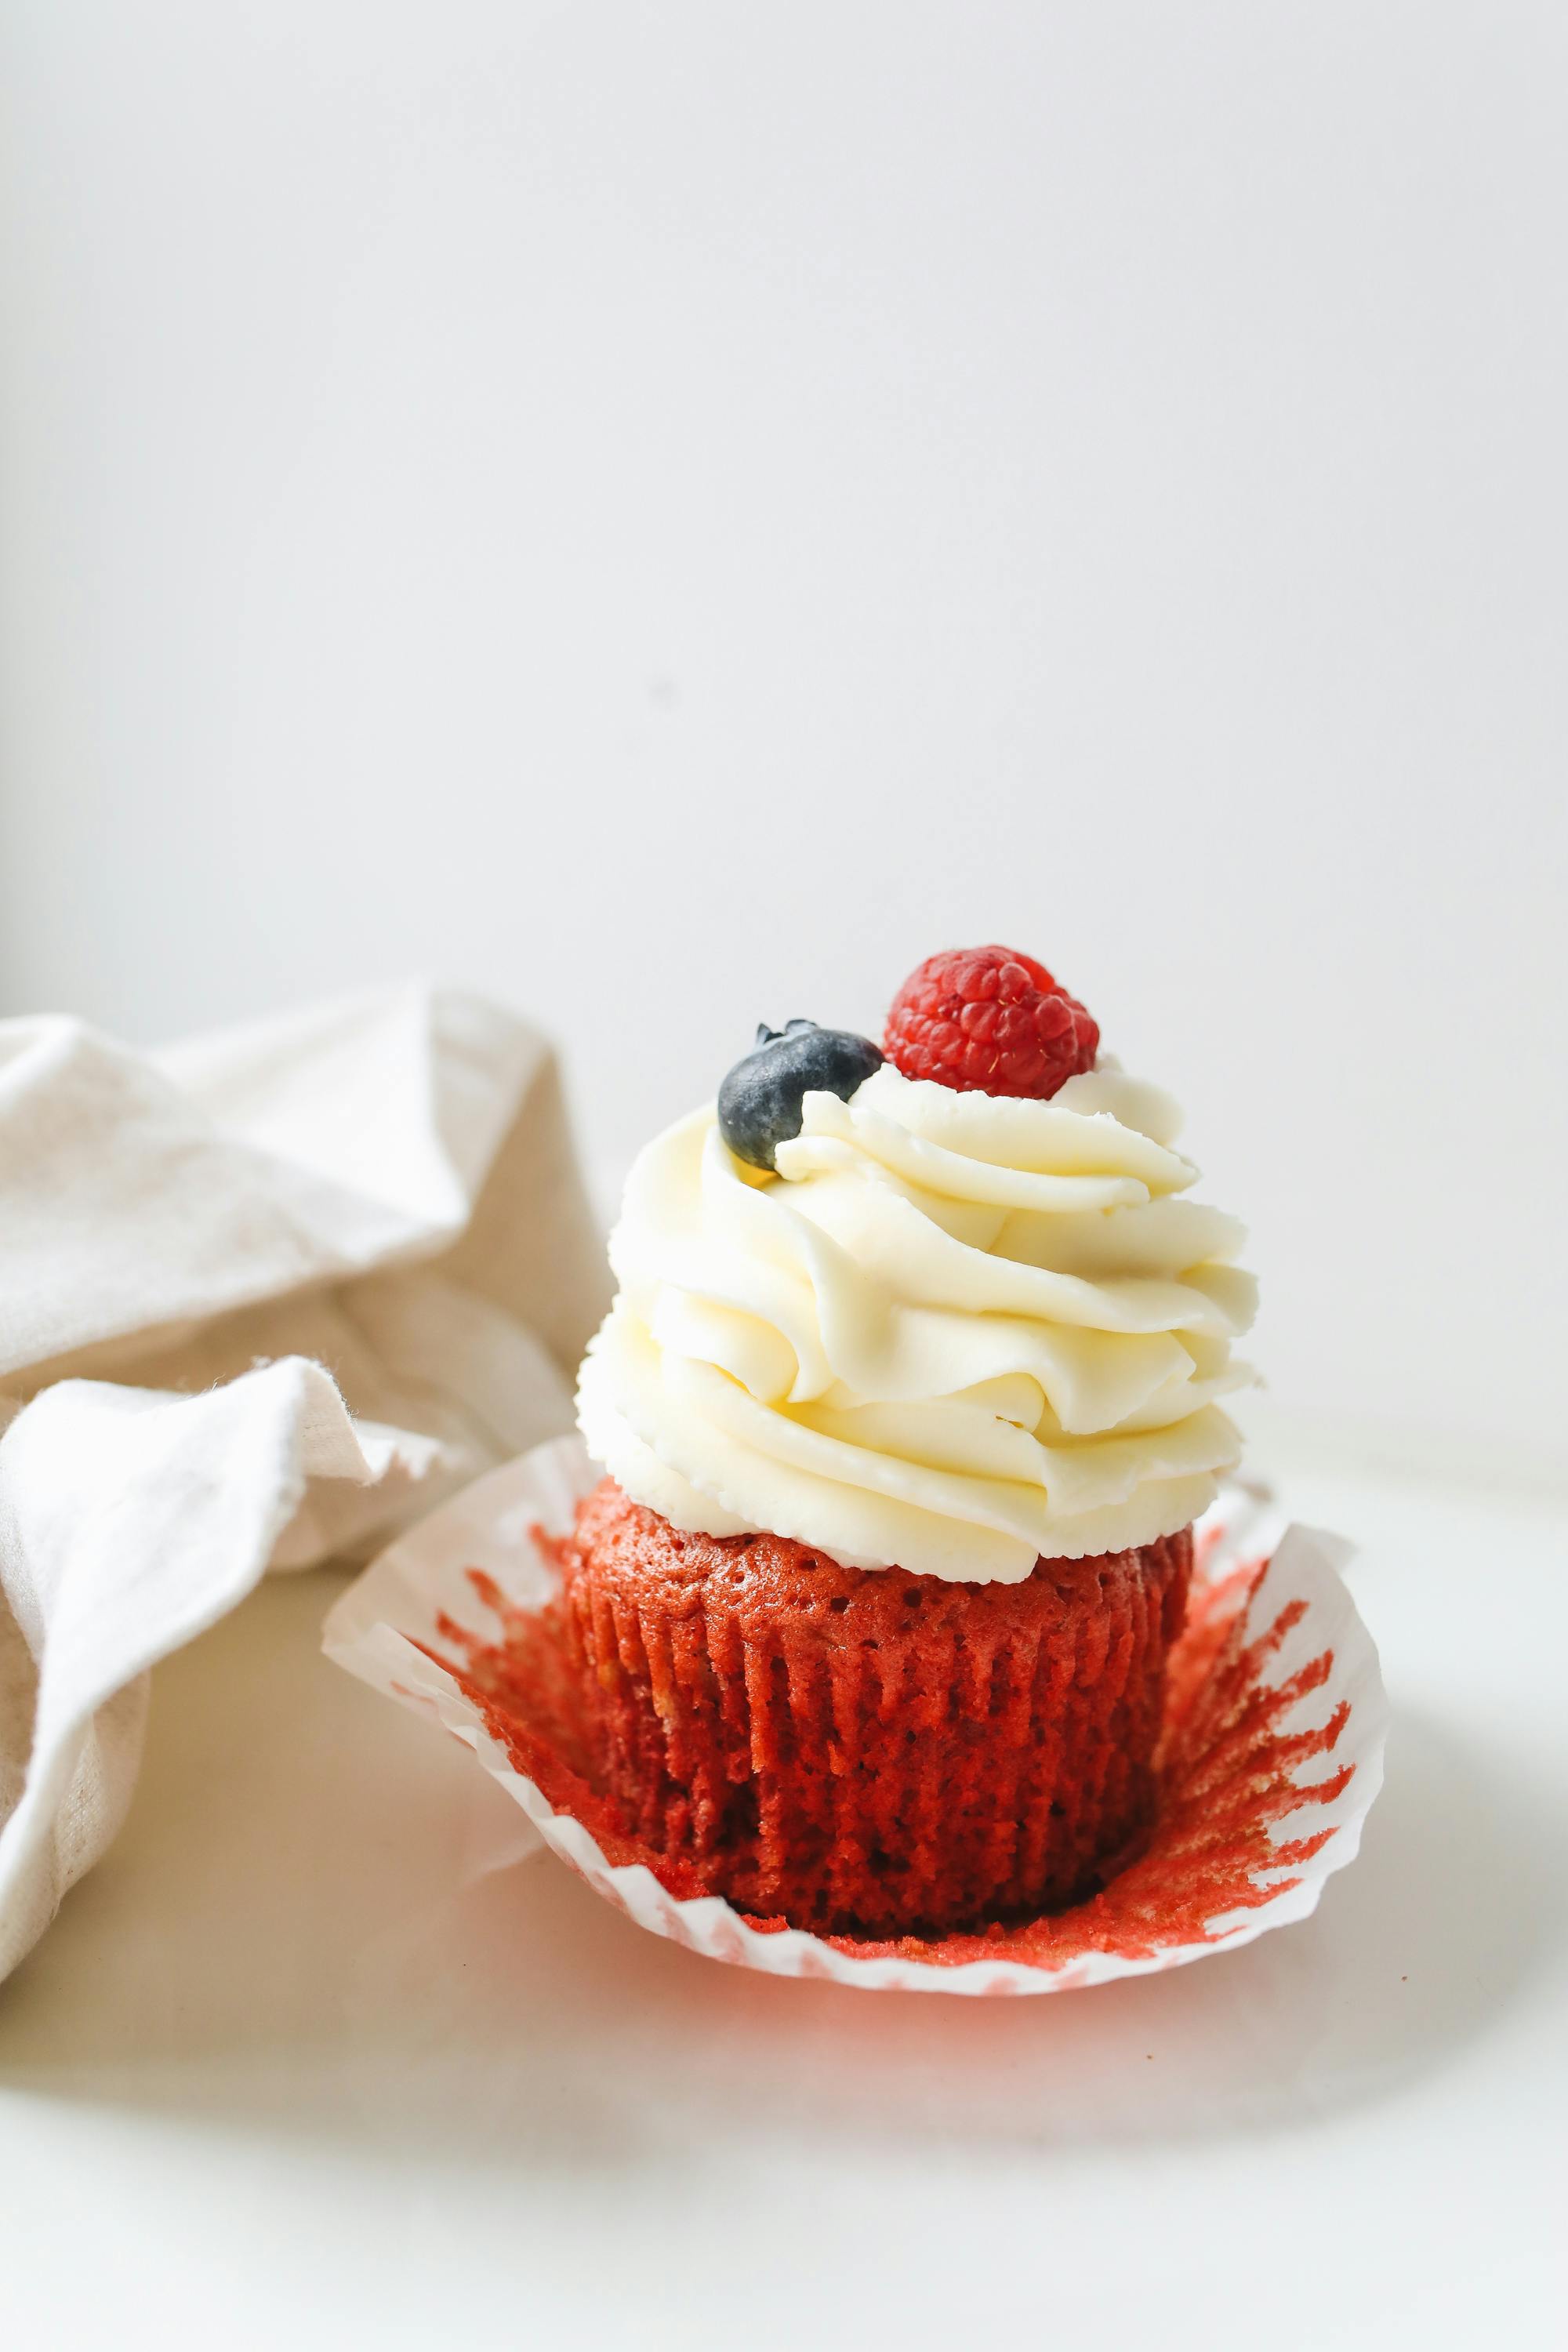  Cupcake With Icing And Berries On Top